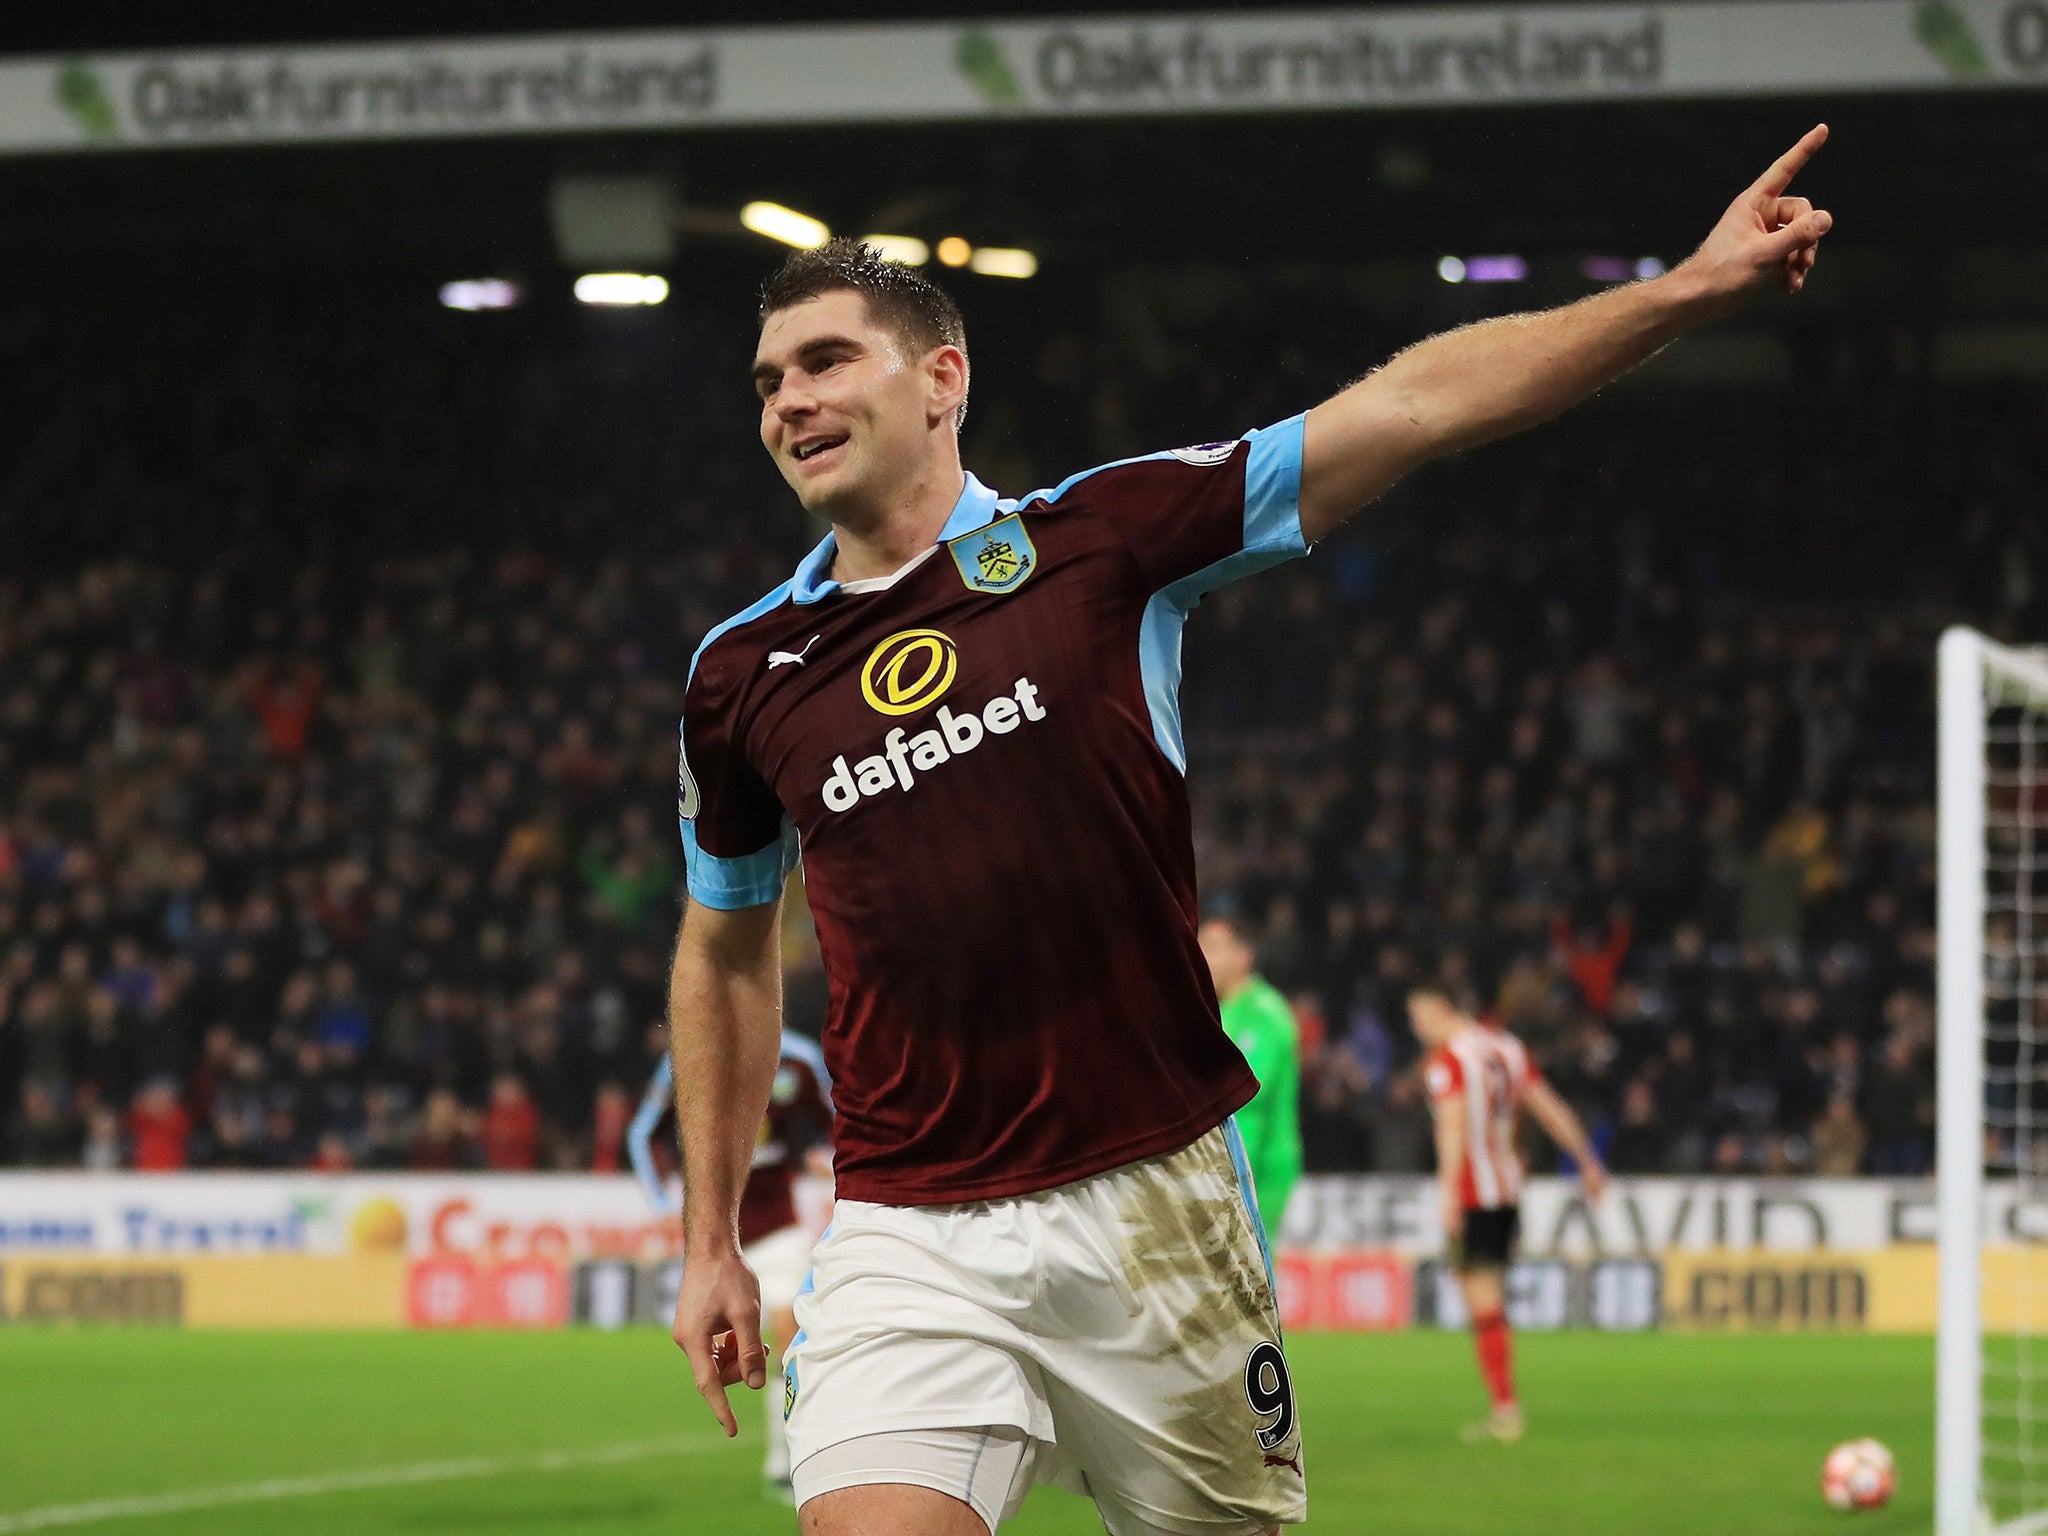 Vokes opened the scoring at Turf Moor just before the half-time whistle